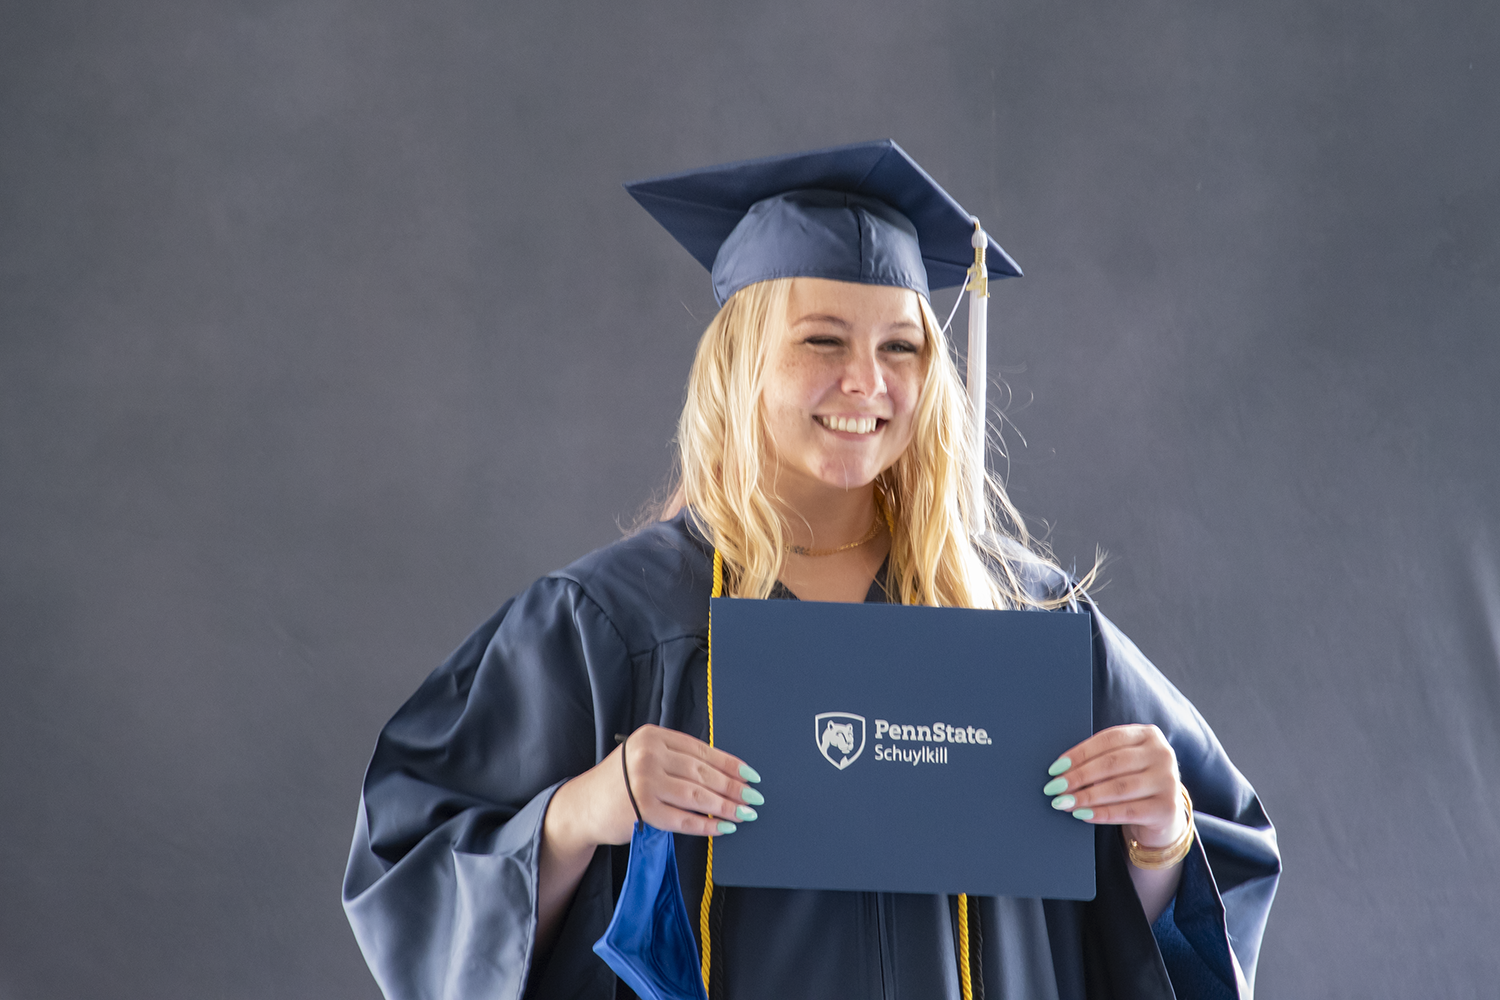 penn-state-schuylkill-spring-2021-commencement-ceremony-image-gallery-12311-penn-state